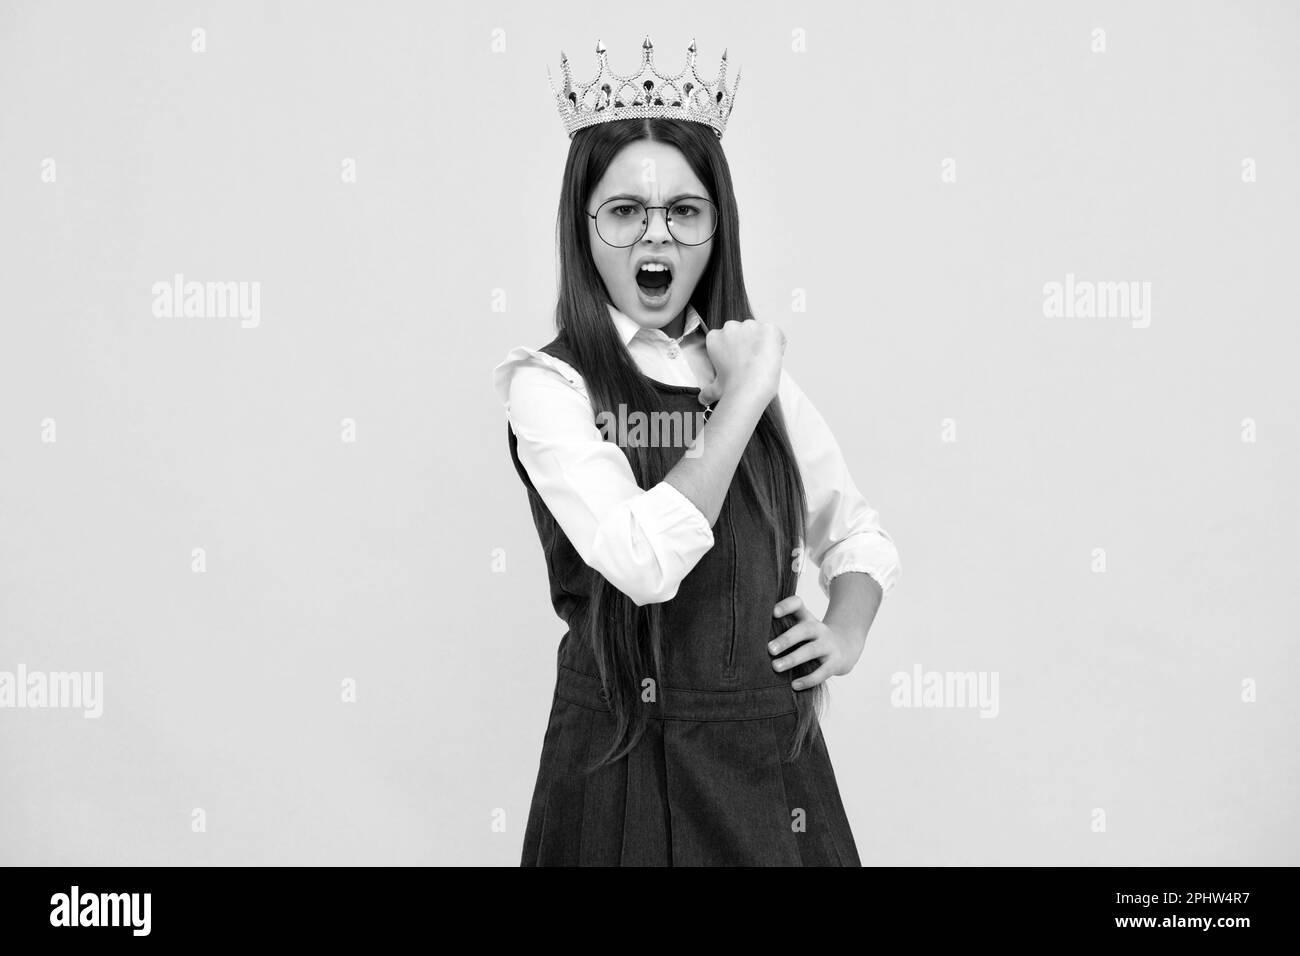 Girls party, funny kid in crown. Child queen wear diadem tiara. Cute little princess portrait. Angry teenager girl, upset and unhappy negative emotion Stock Photo